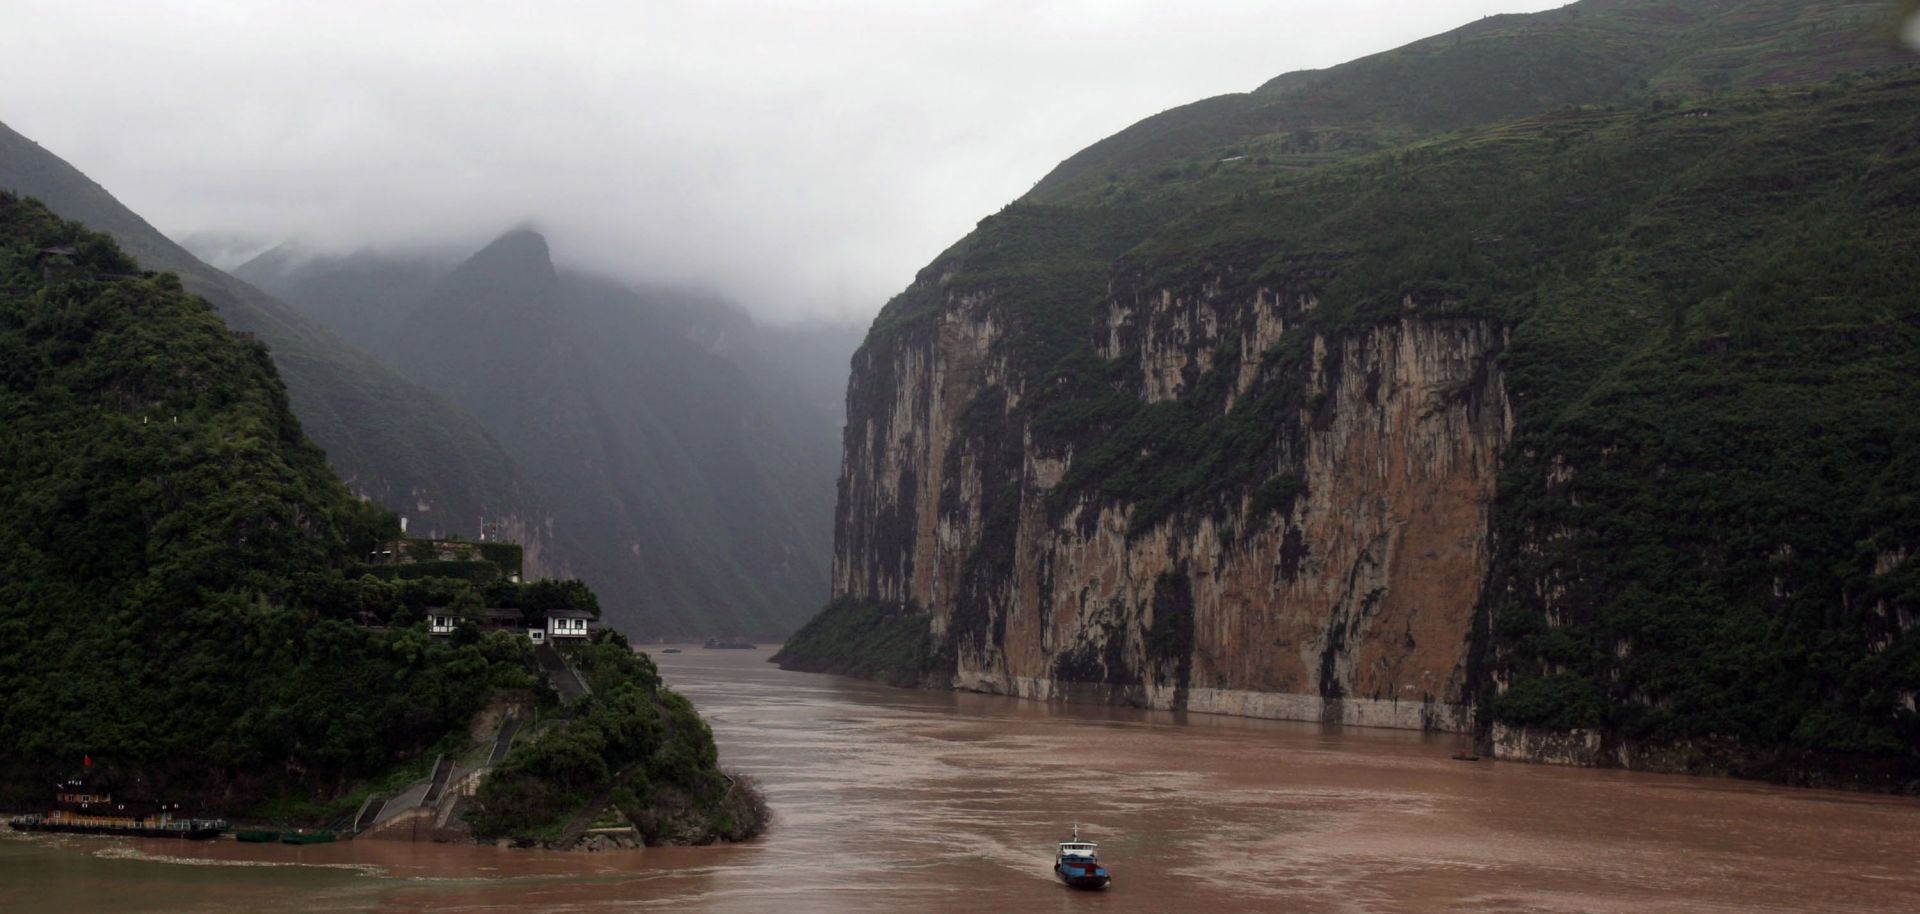 A boat sails at the Kuimen Gate of Qutang Gorge.